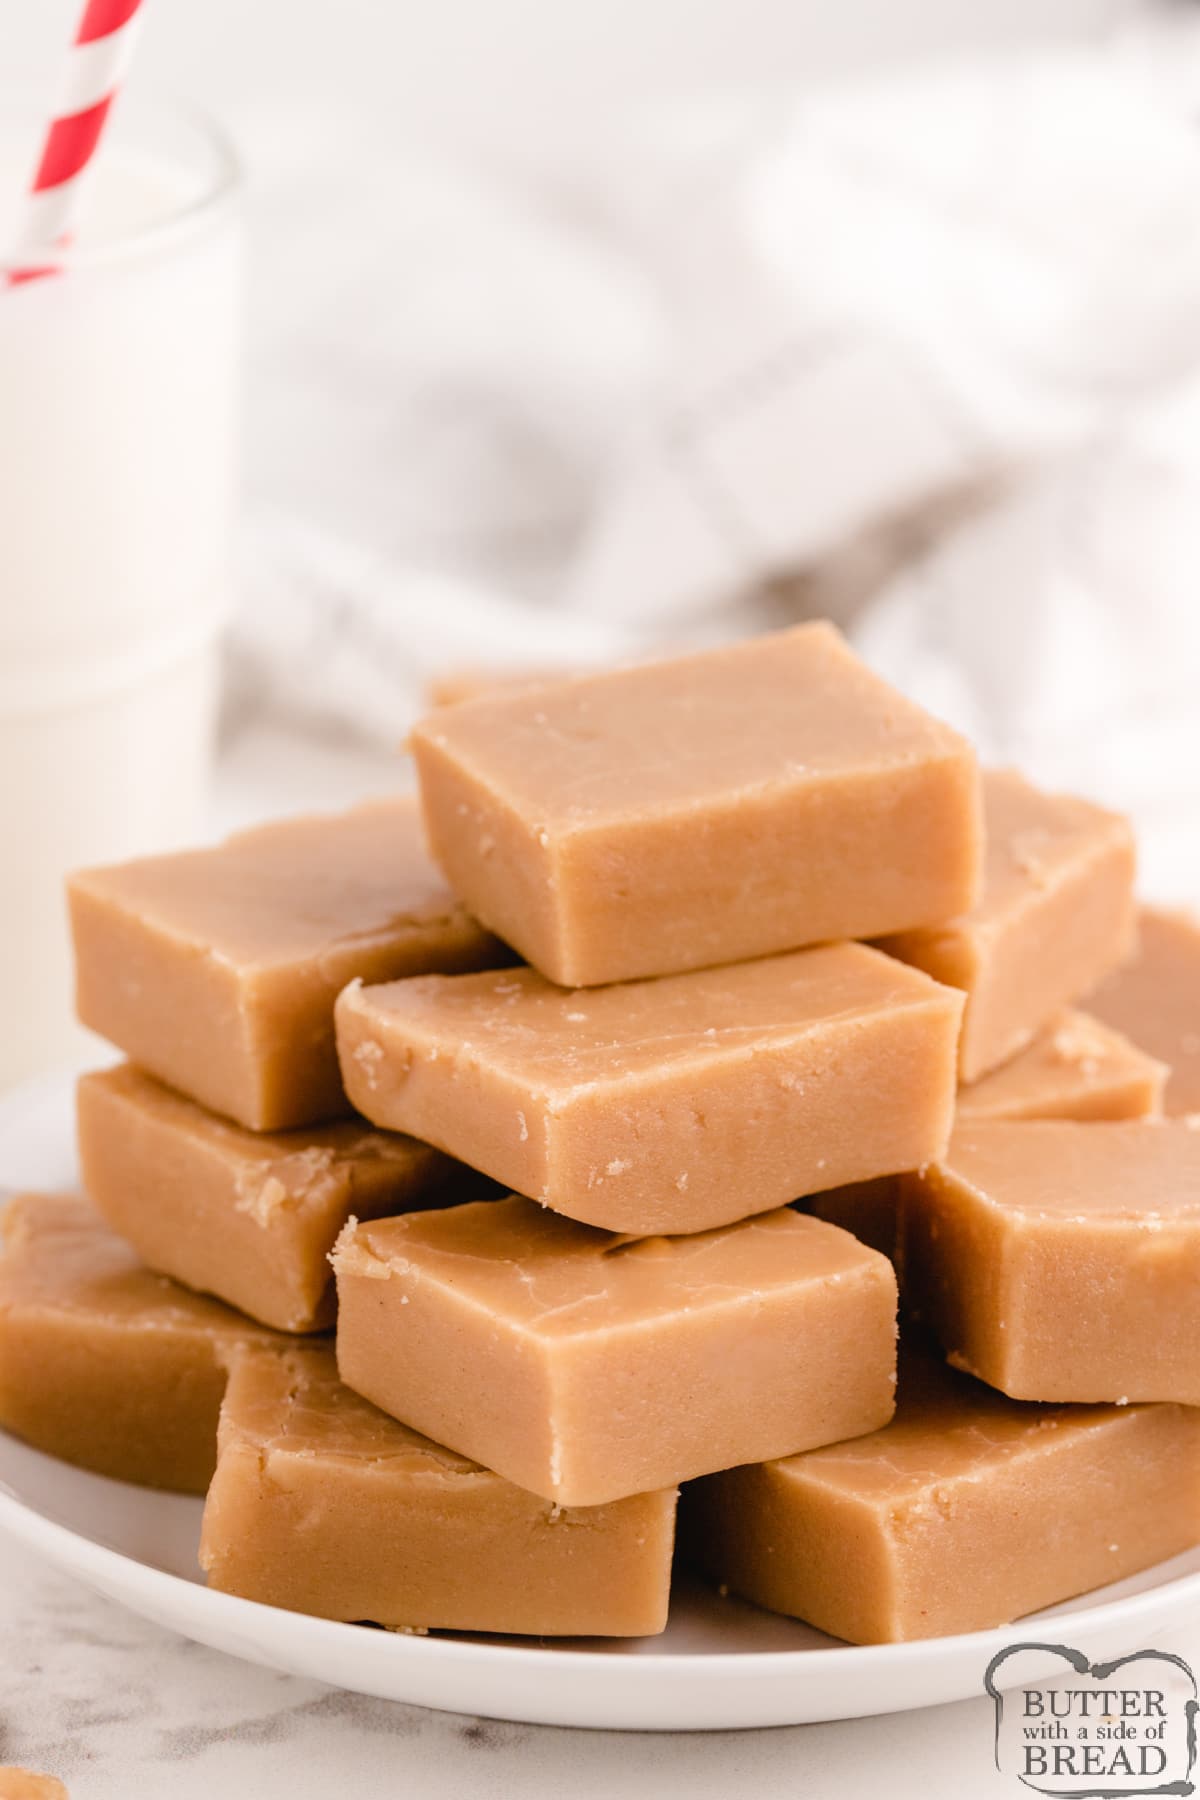 eanut Butter Fudge is easily made with only 4 ingredients, no candy thermometer needed! This easy fudge recipe is made with peanut butter, sugar, milk and vanilla extract- that's it!